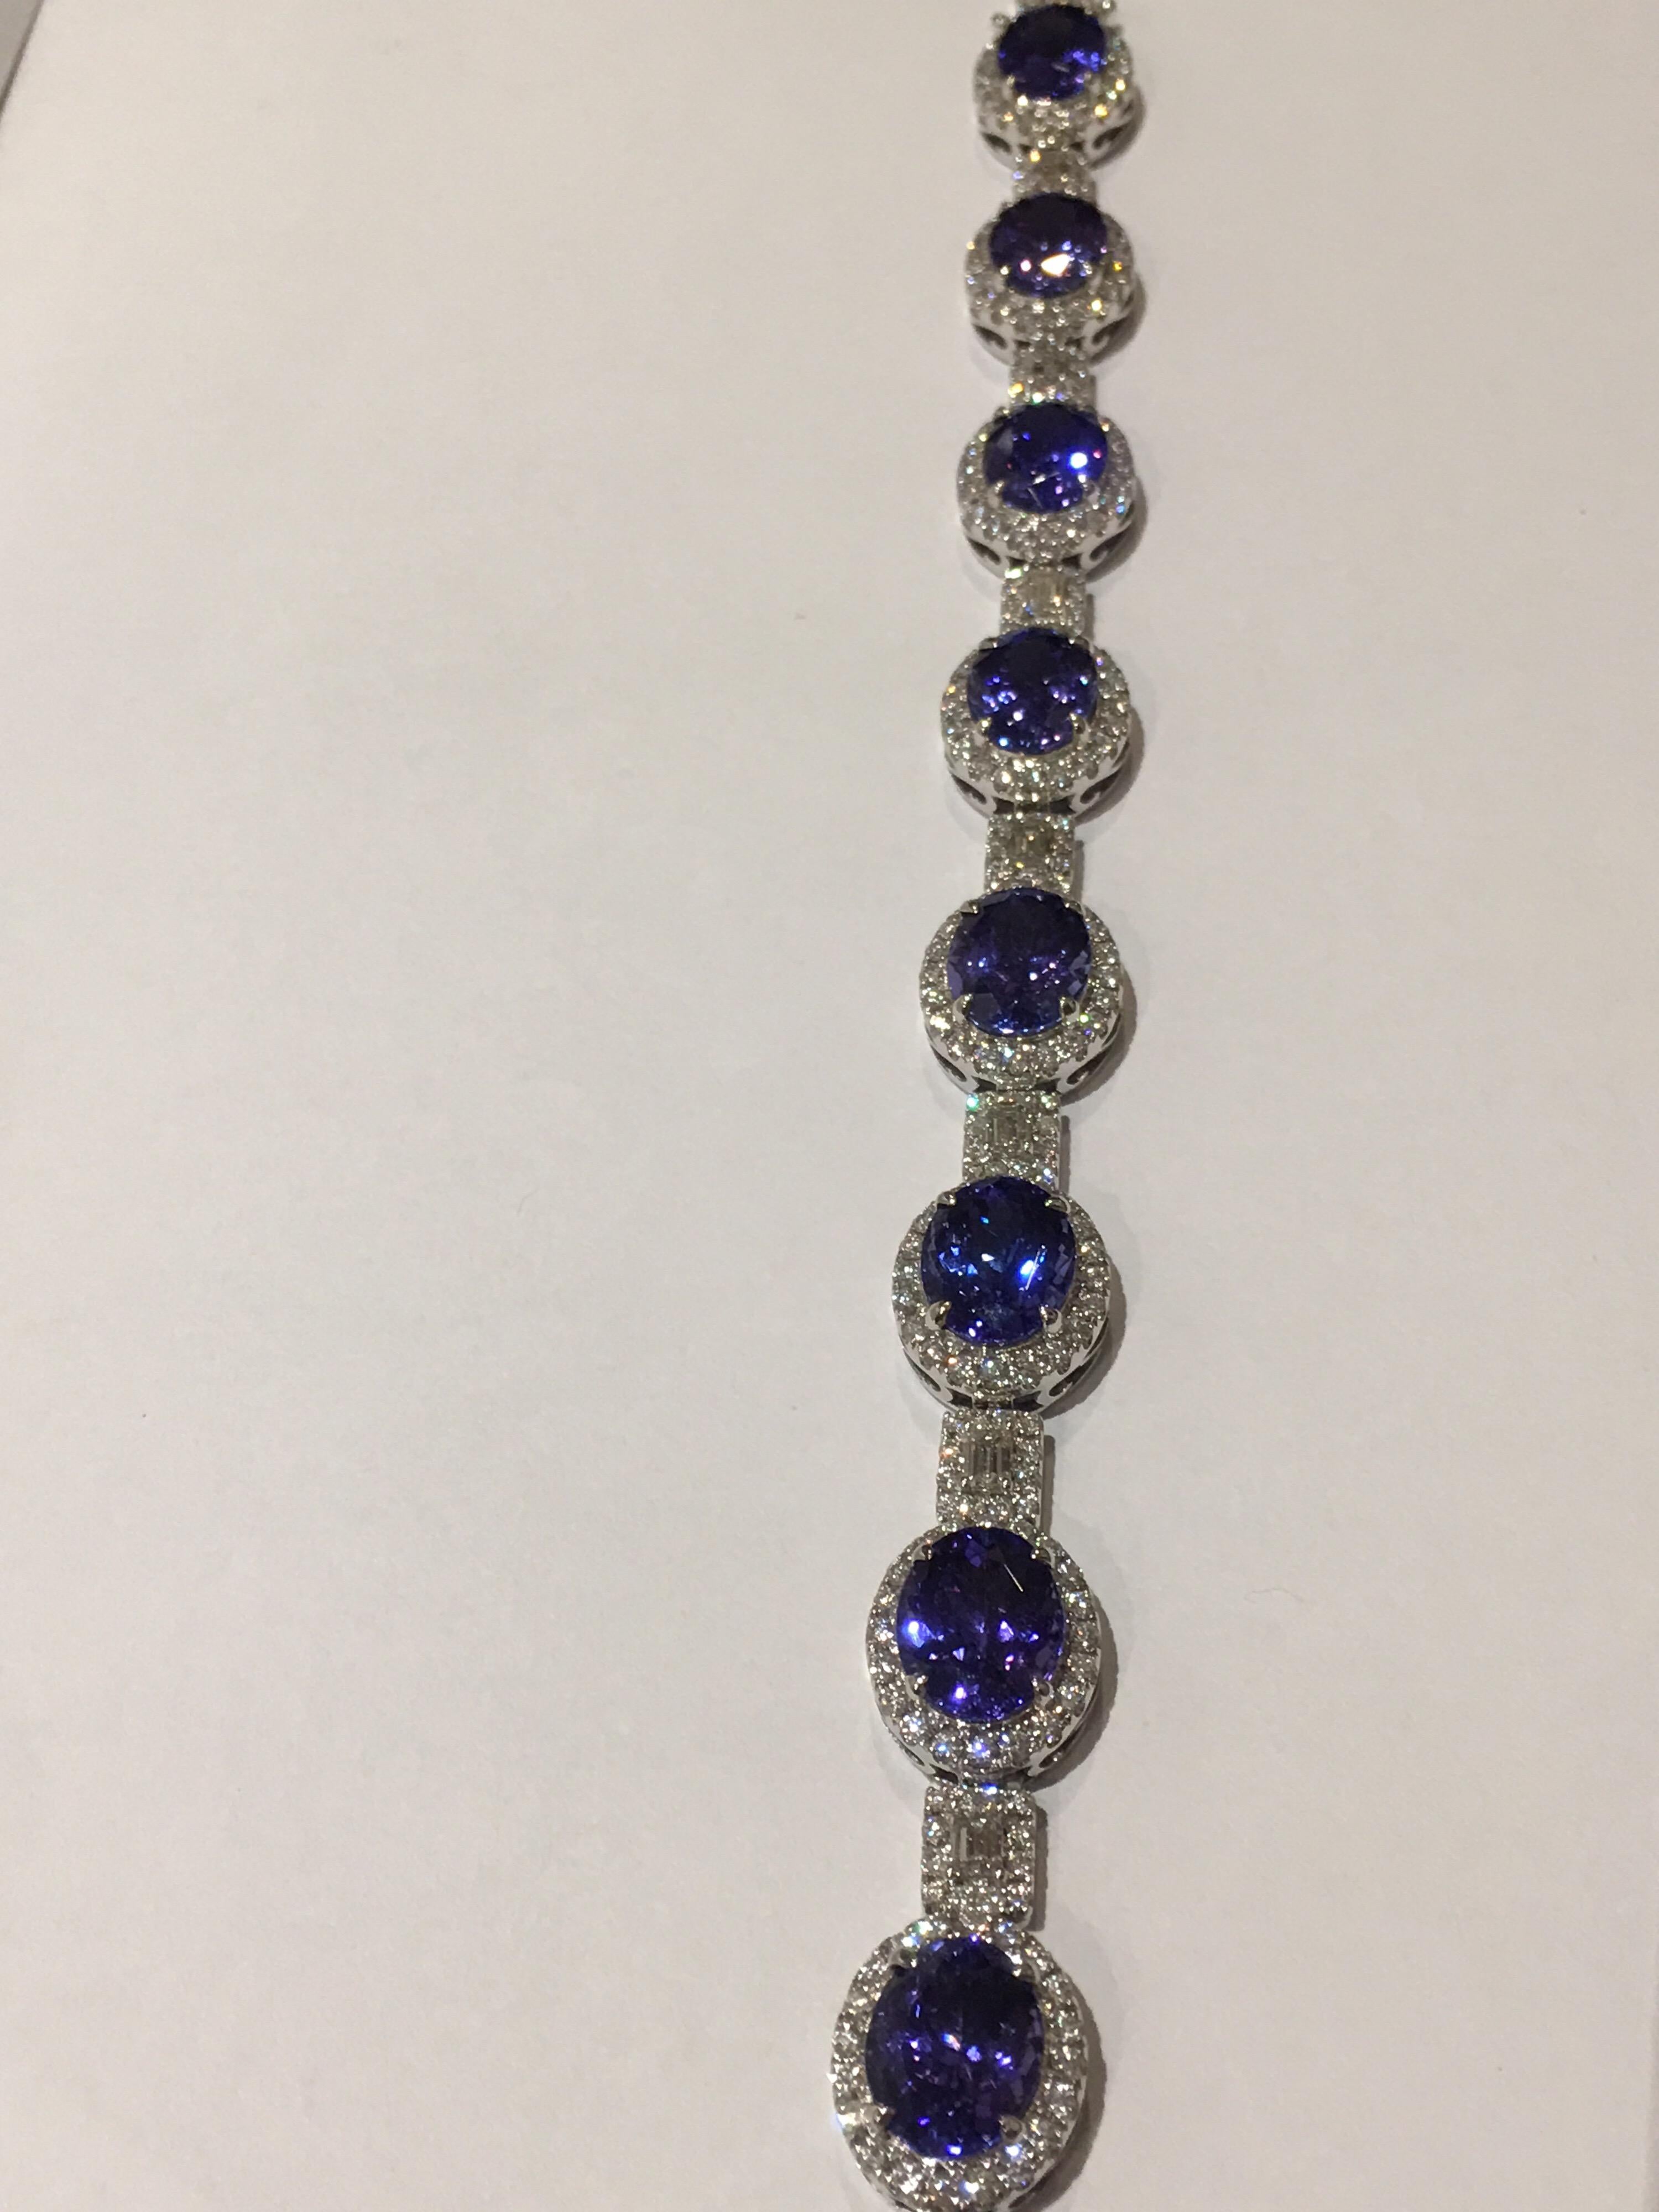 All matched AAA Royal Blue Ink Color Tanzanite is hand made one of a kind.
The Bracelet is made out of Beautiful 31.81 Carat  Tanzanite and 5.37 Round and Emerald Cut In between.
The Bracelet is made of of 18K White Gold.